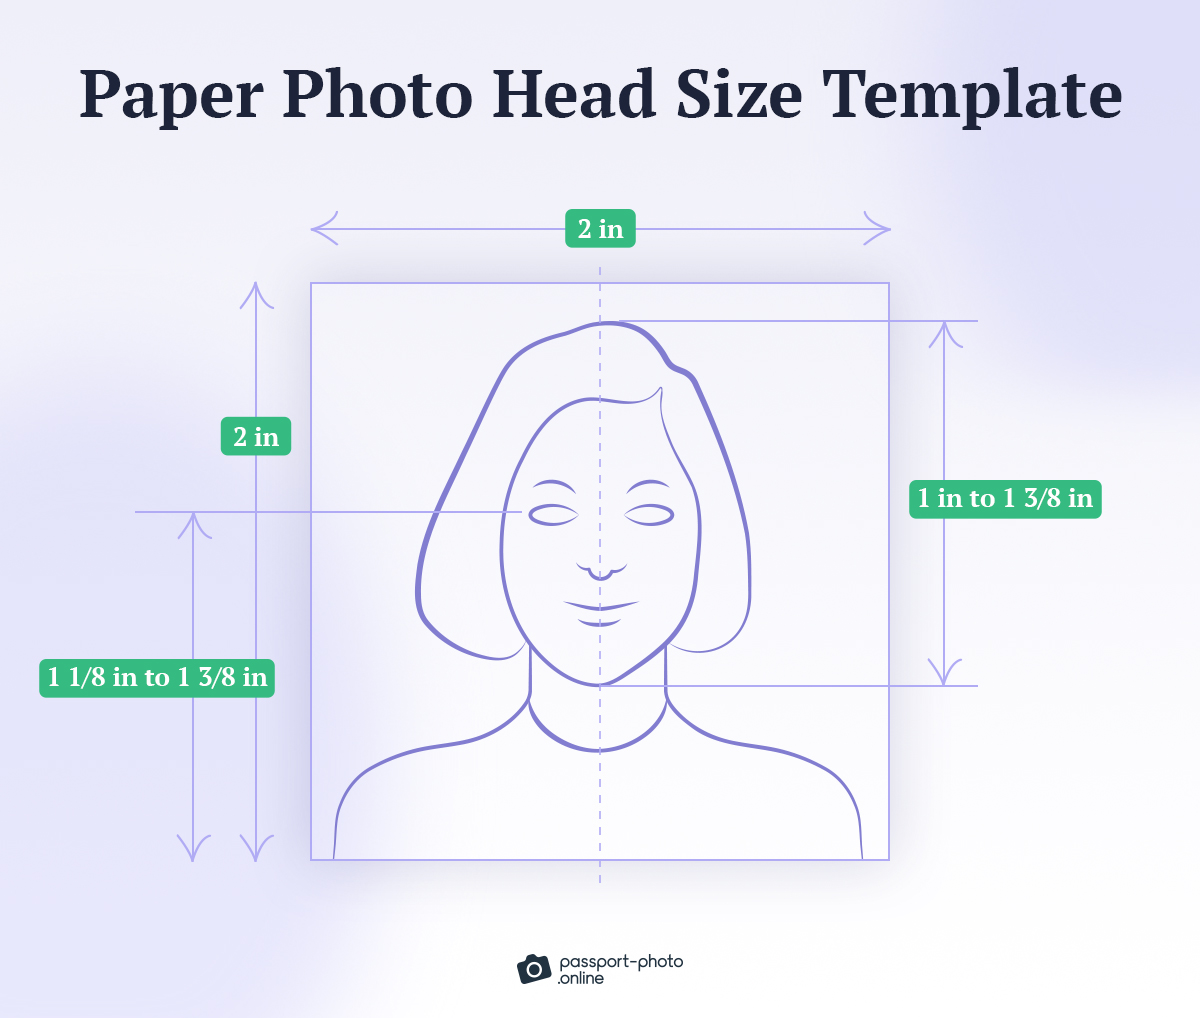 A head-size template for paper passport photos in white and purple colors, with the portrait of a short-haired woman.